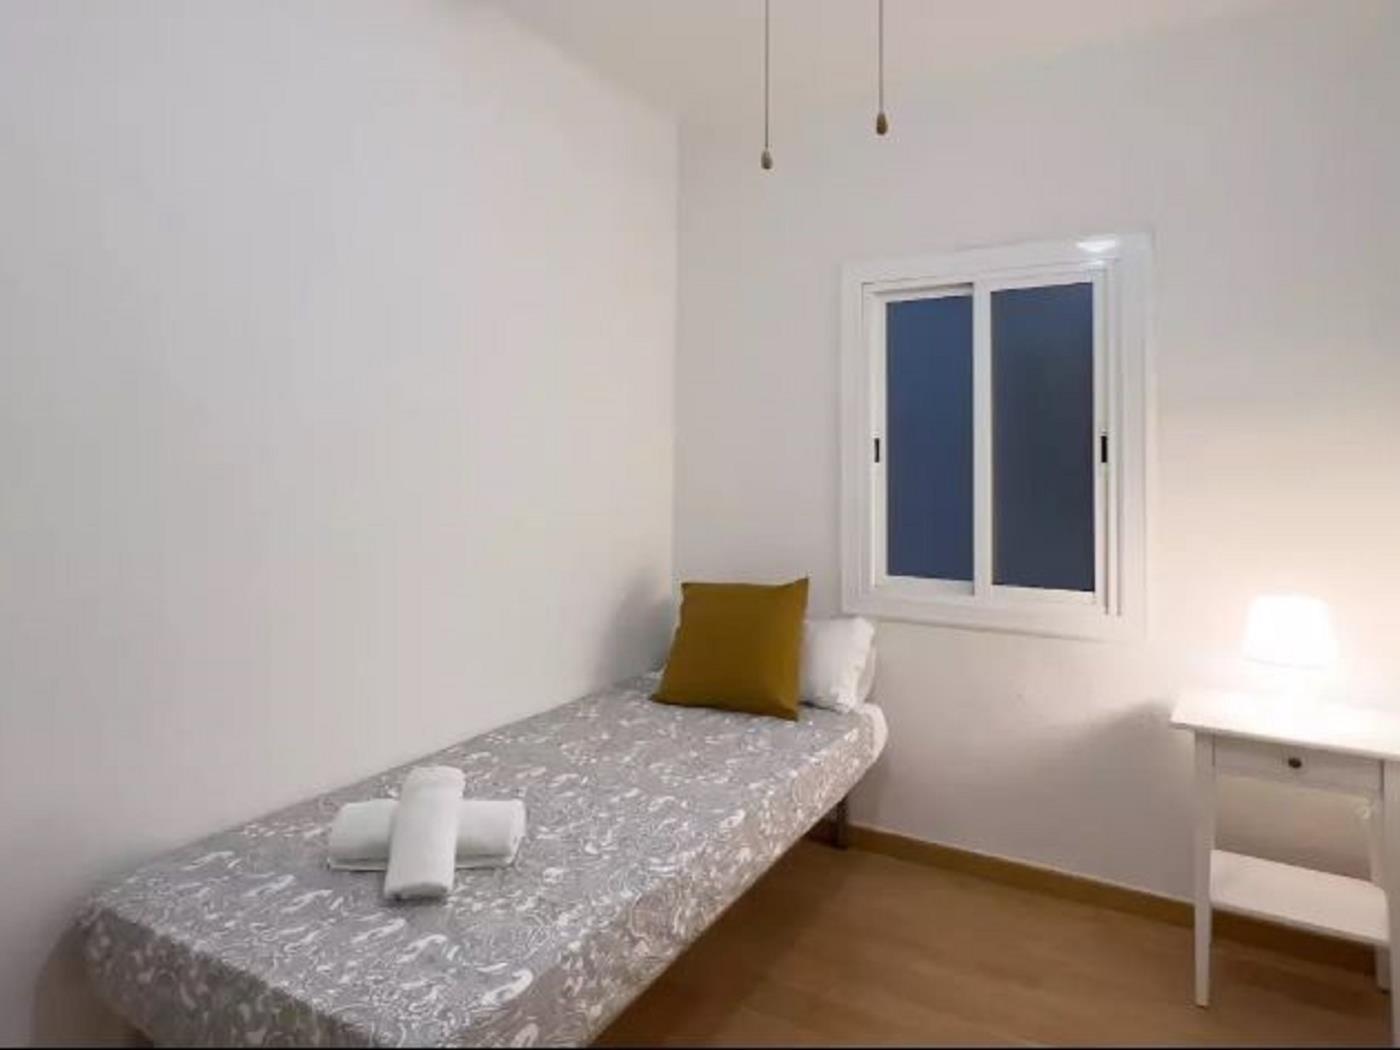 Spacious and central flat with 3 bedrooms - My Space Barcelona Apartments